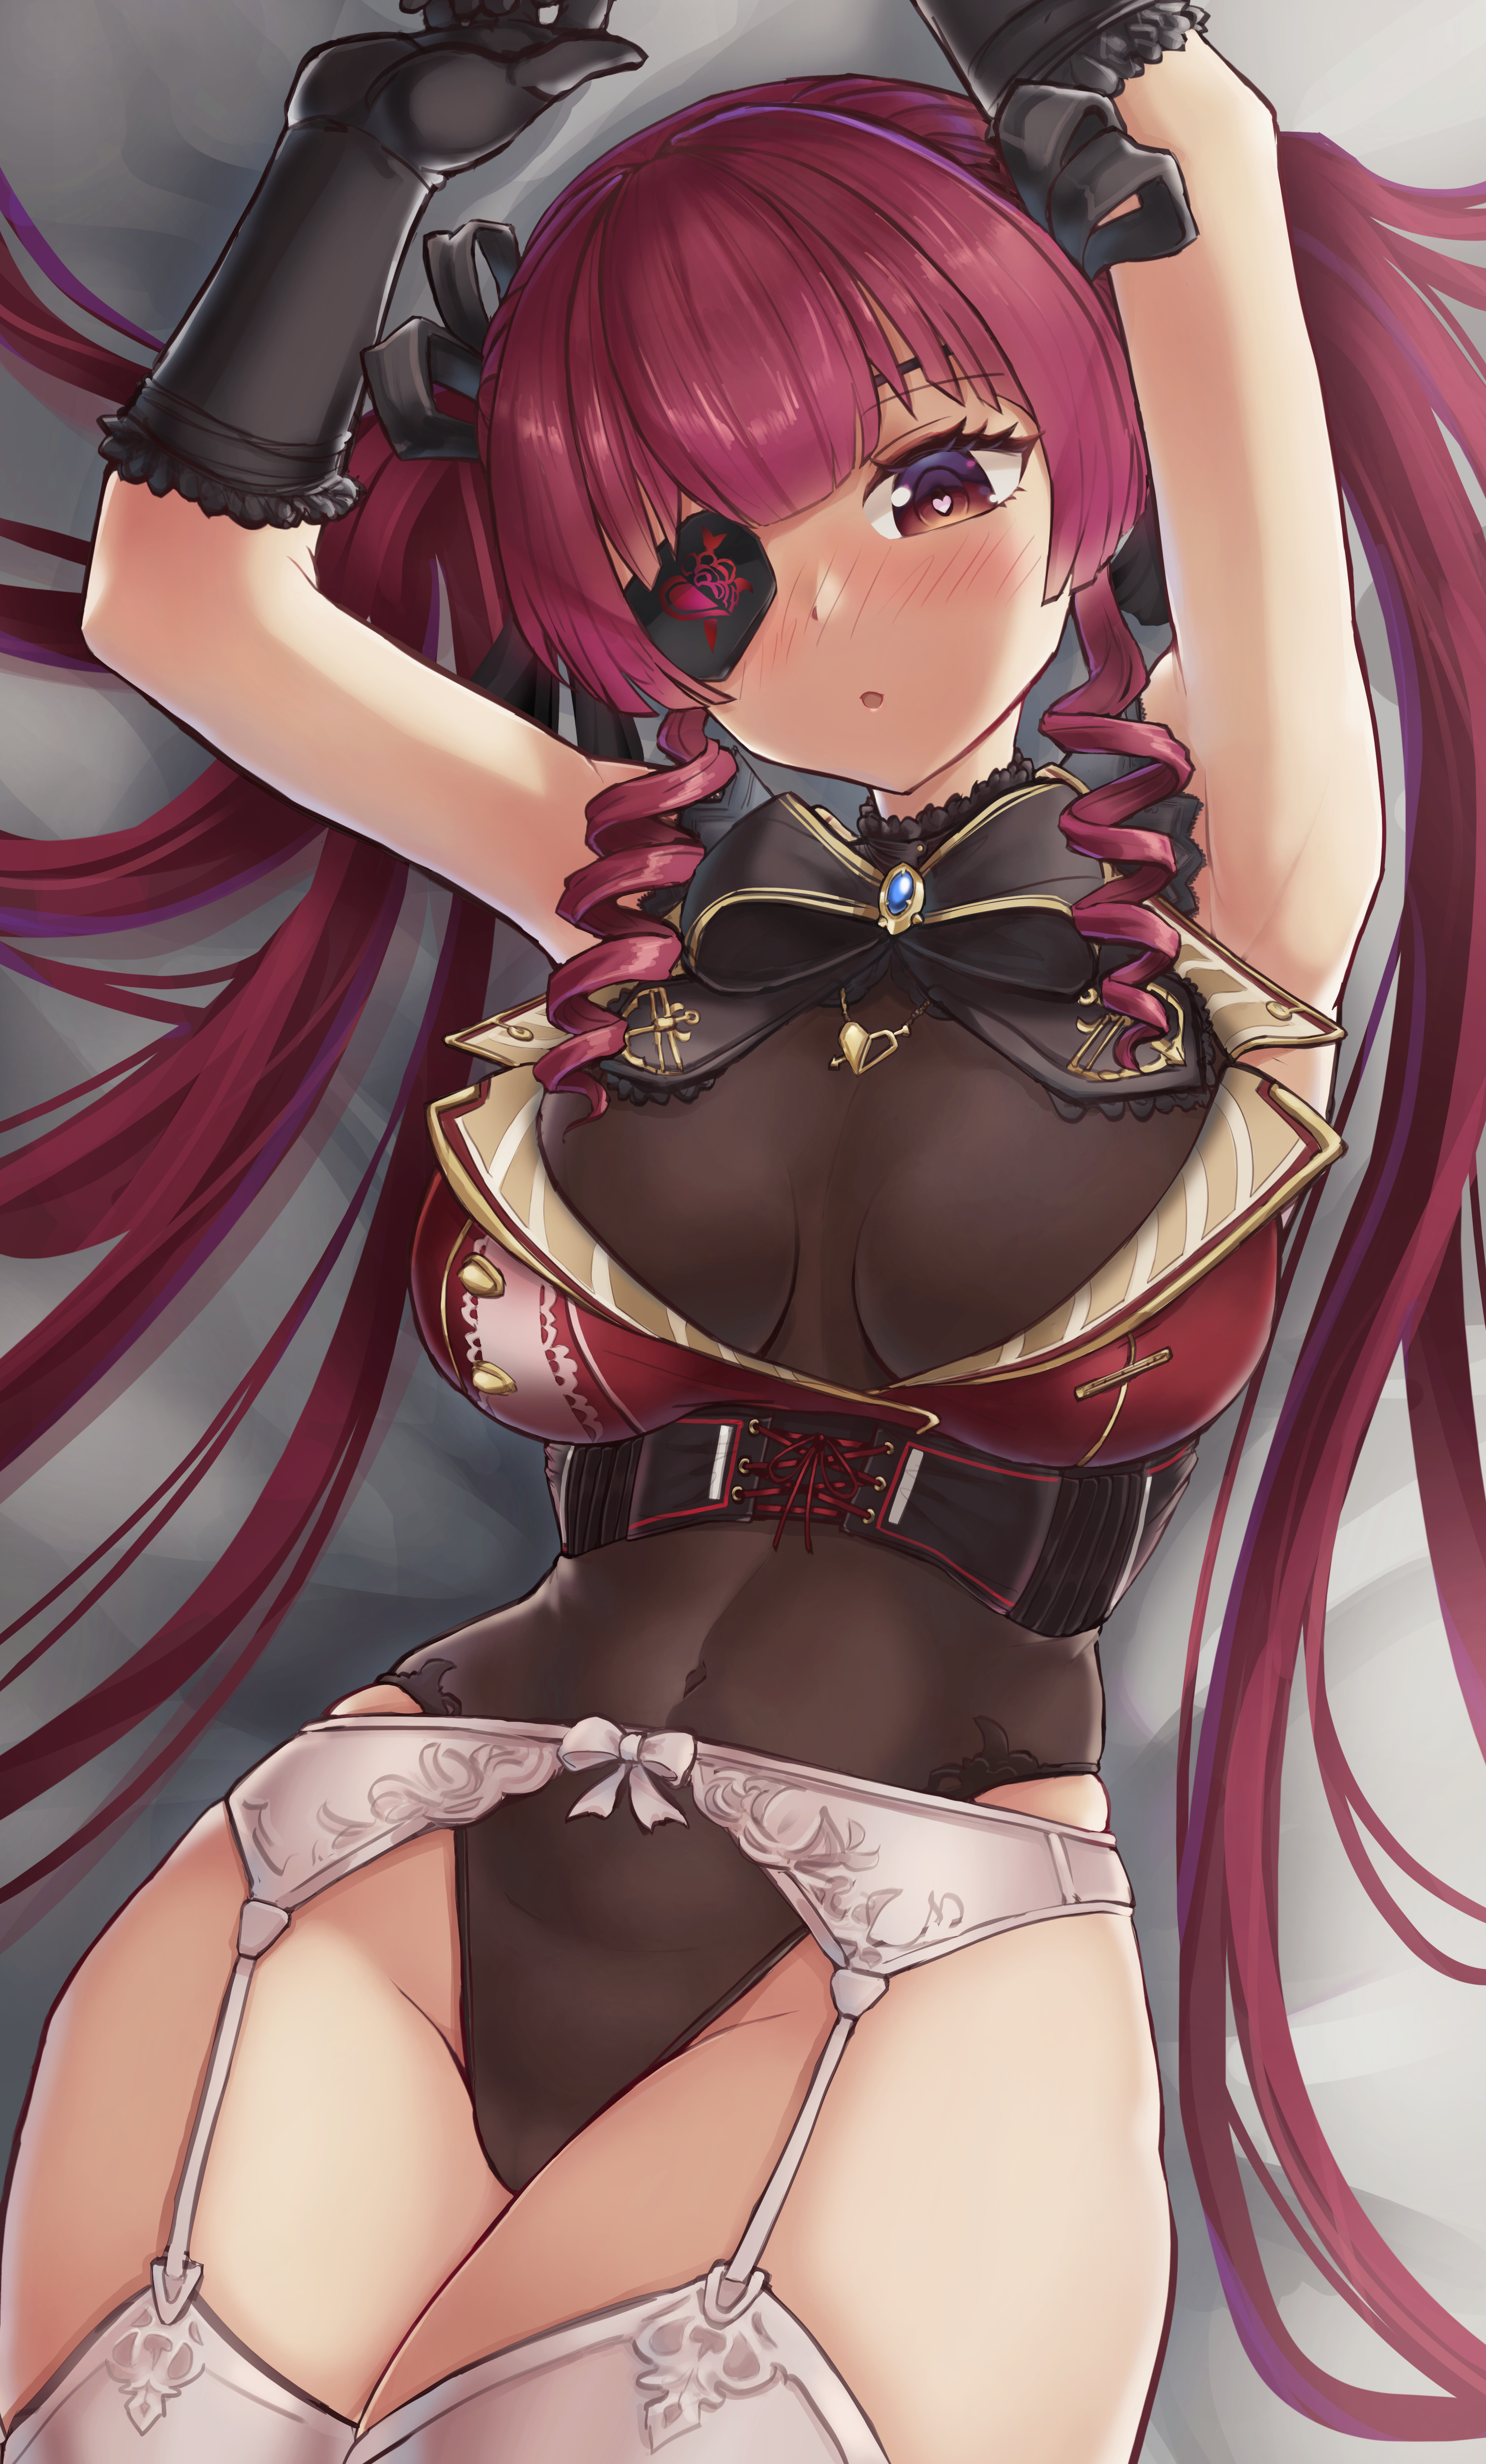 Anime 3648x6047 Hololive Virtual Youtuber anime girls eyepatches twintails stockings garter belt big boobs thighs heart eyes redhead